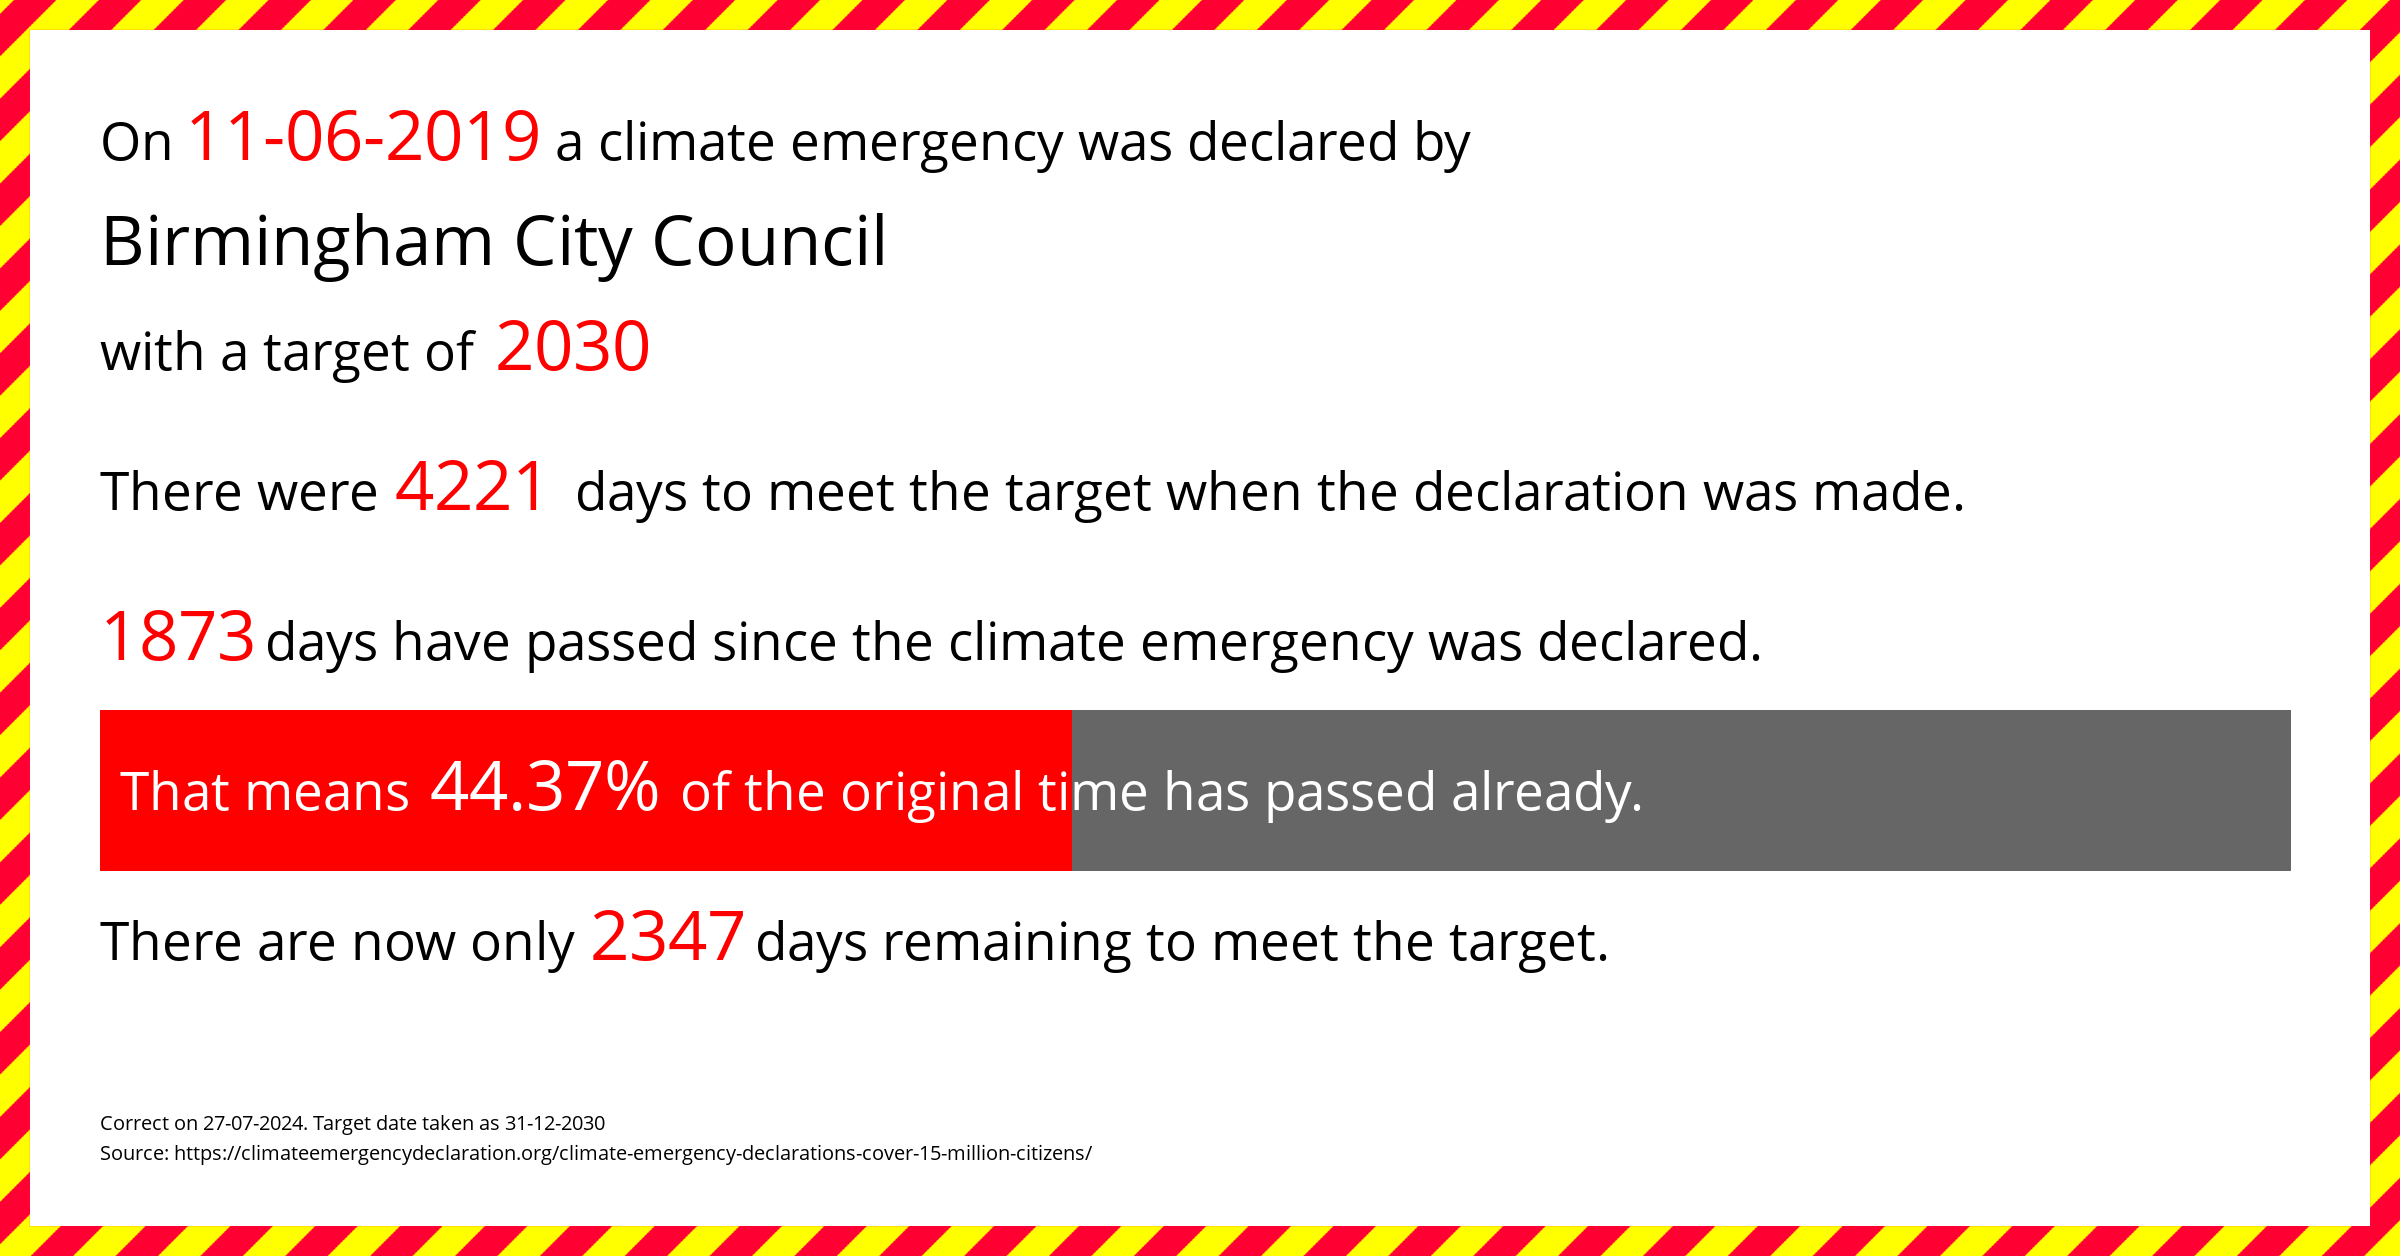 Birmingham City Council declared a Climate emergency on Tuesday 11th June 2019, with a target of 2030.